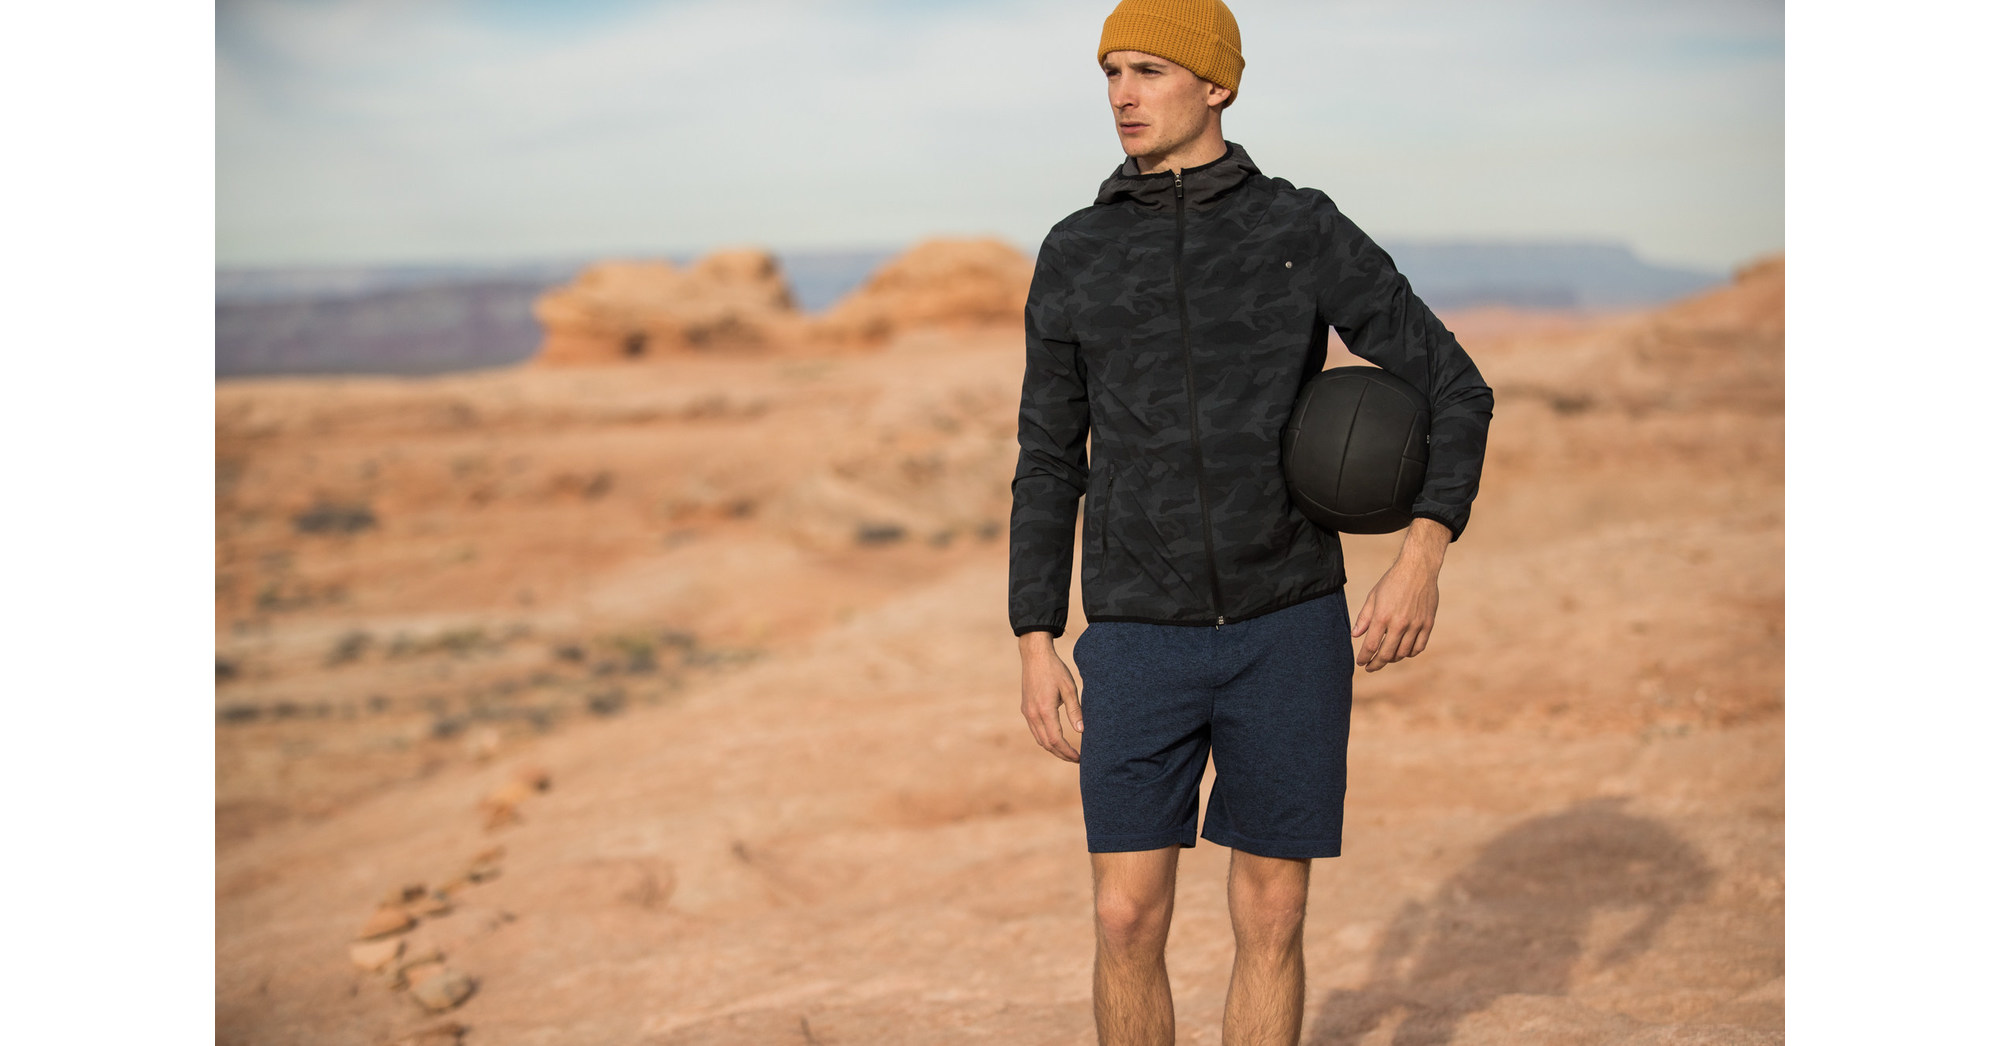 Growth Equity Firm Norwest Invests in Rapidly Growing Activewear